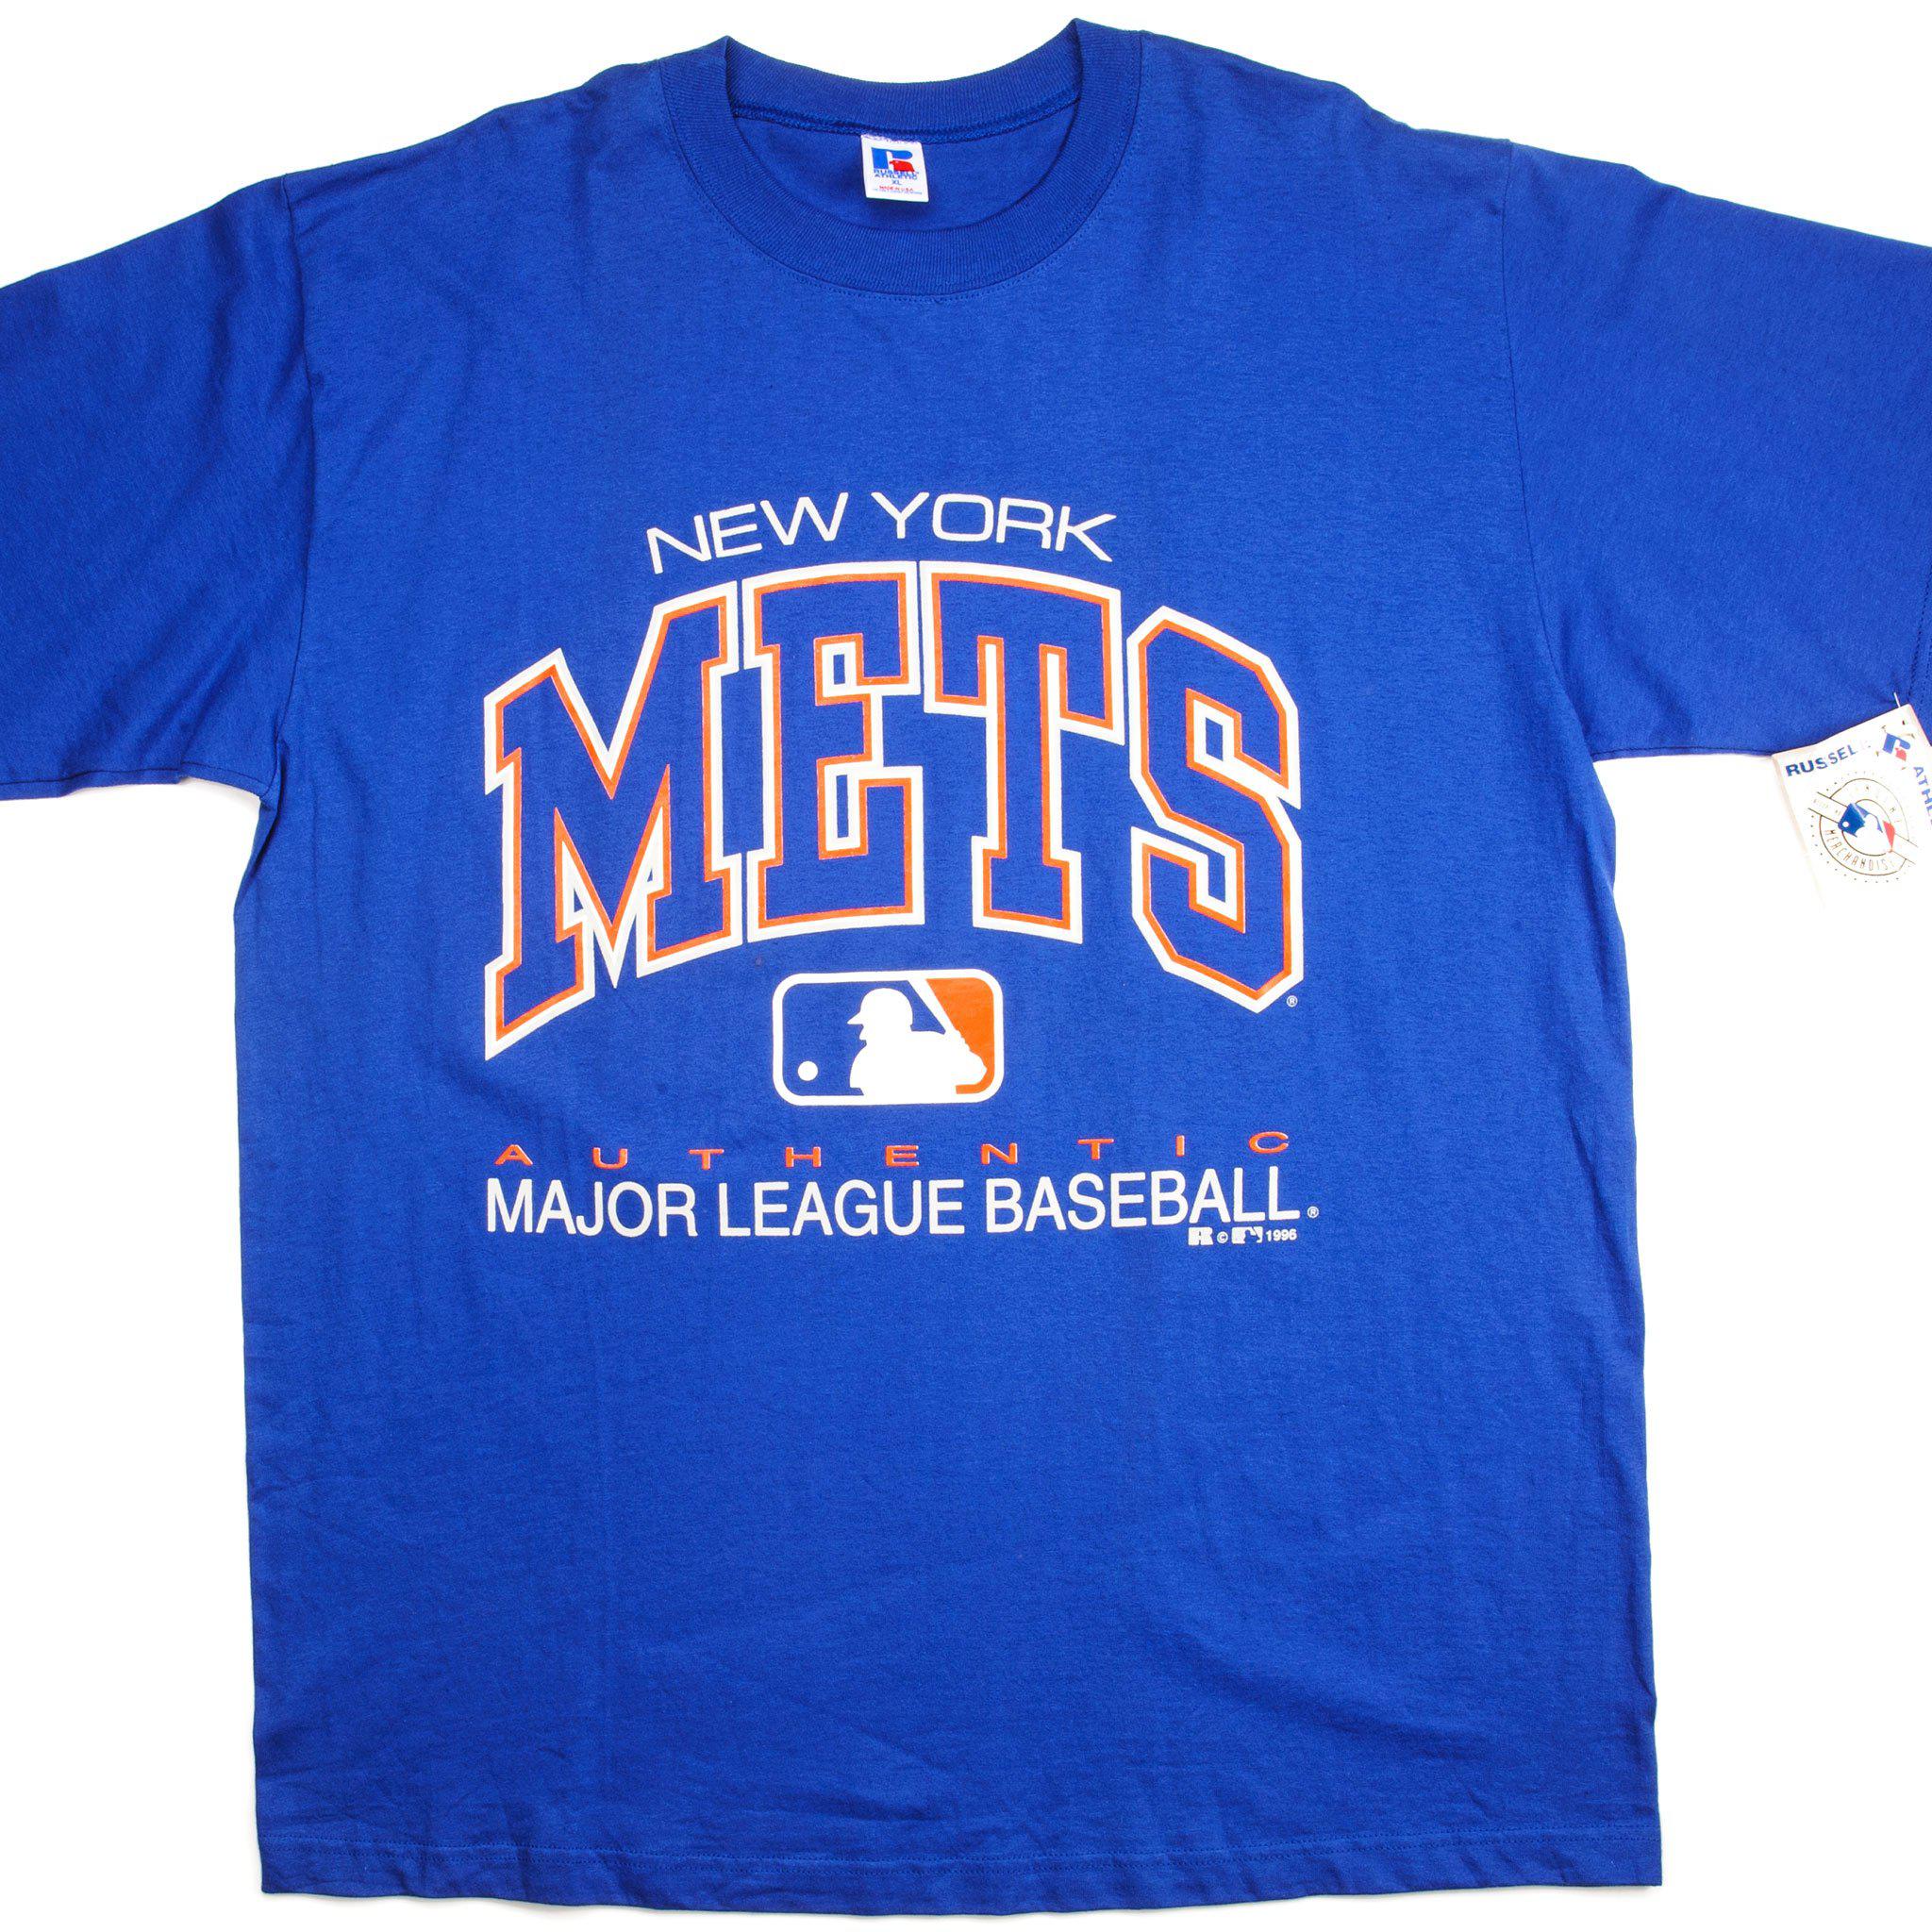 Vintage MLB New York Mets Tee Shirt 1996 Size XL Made in USA Deadstock